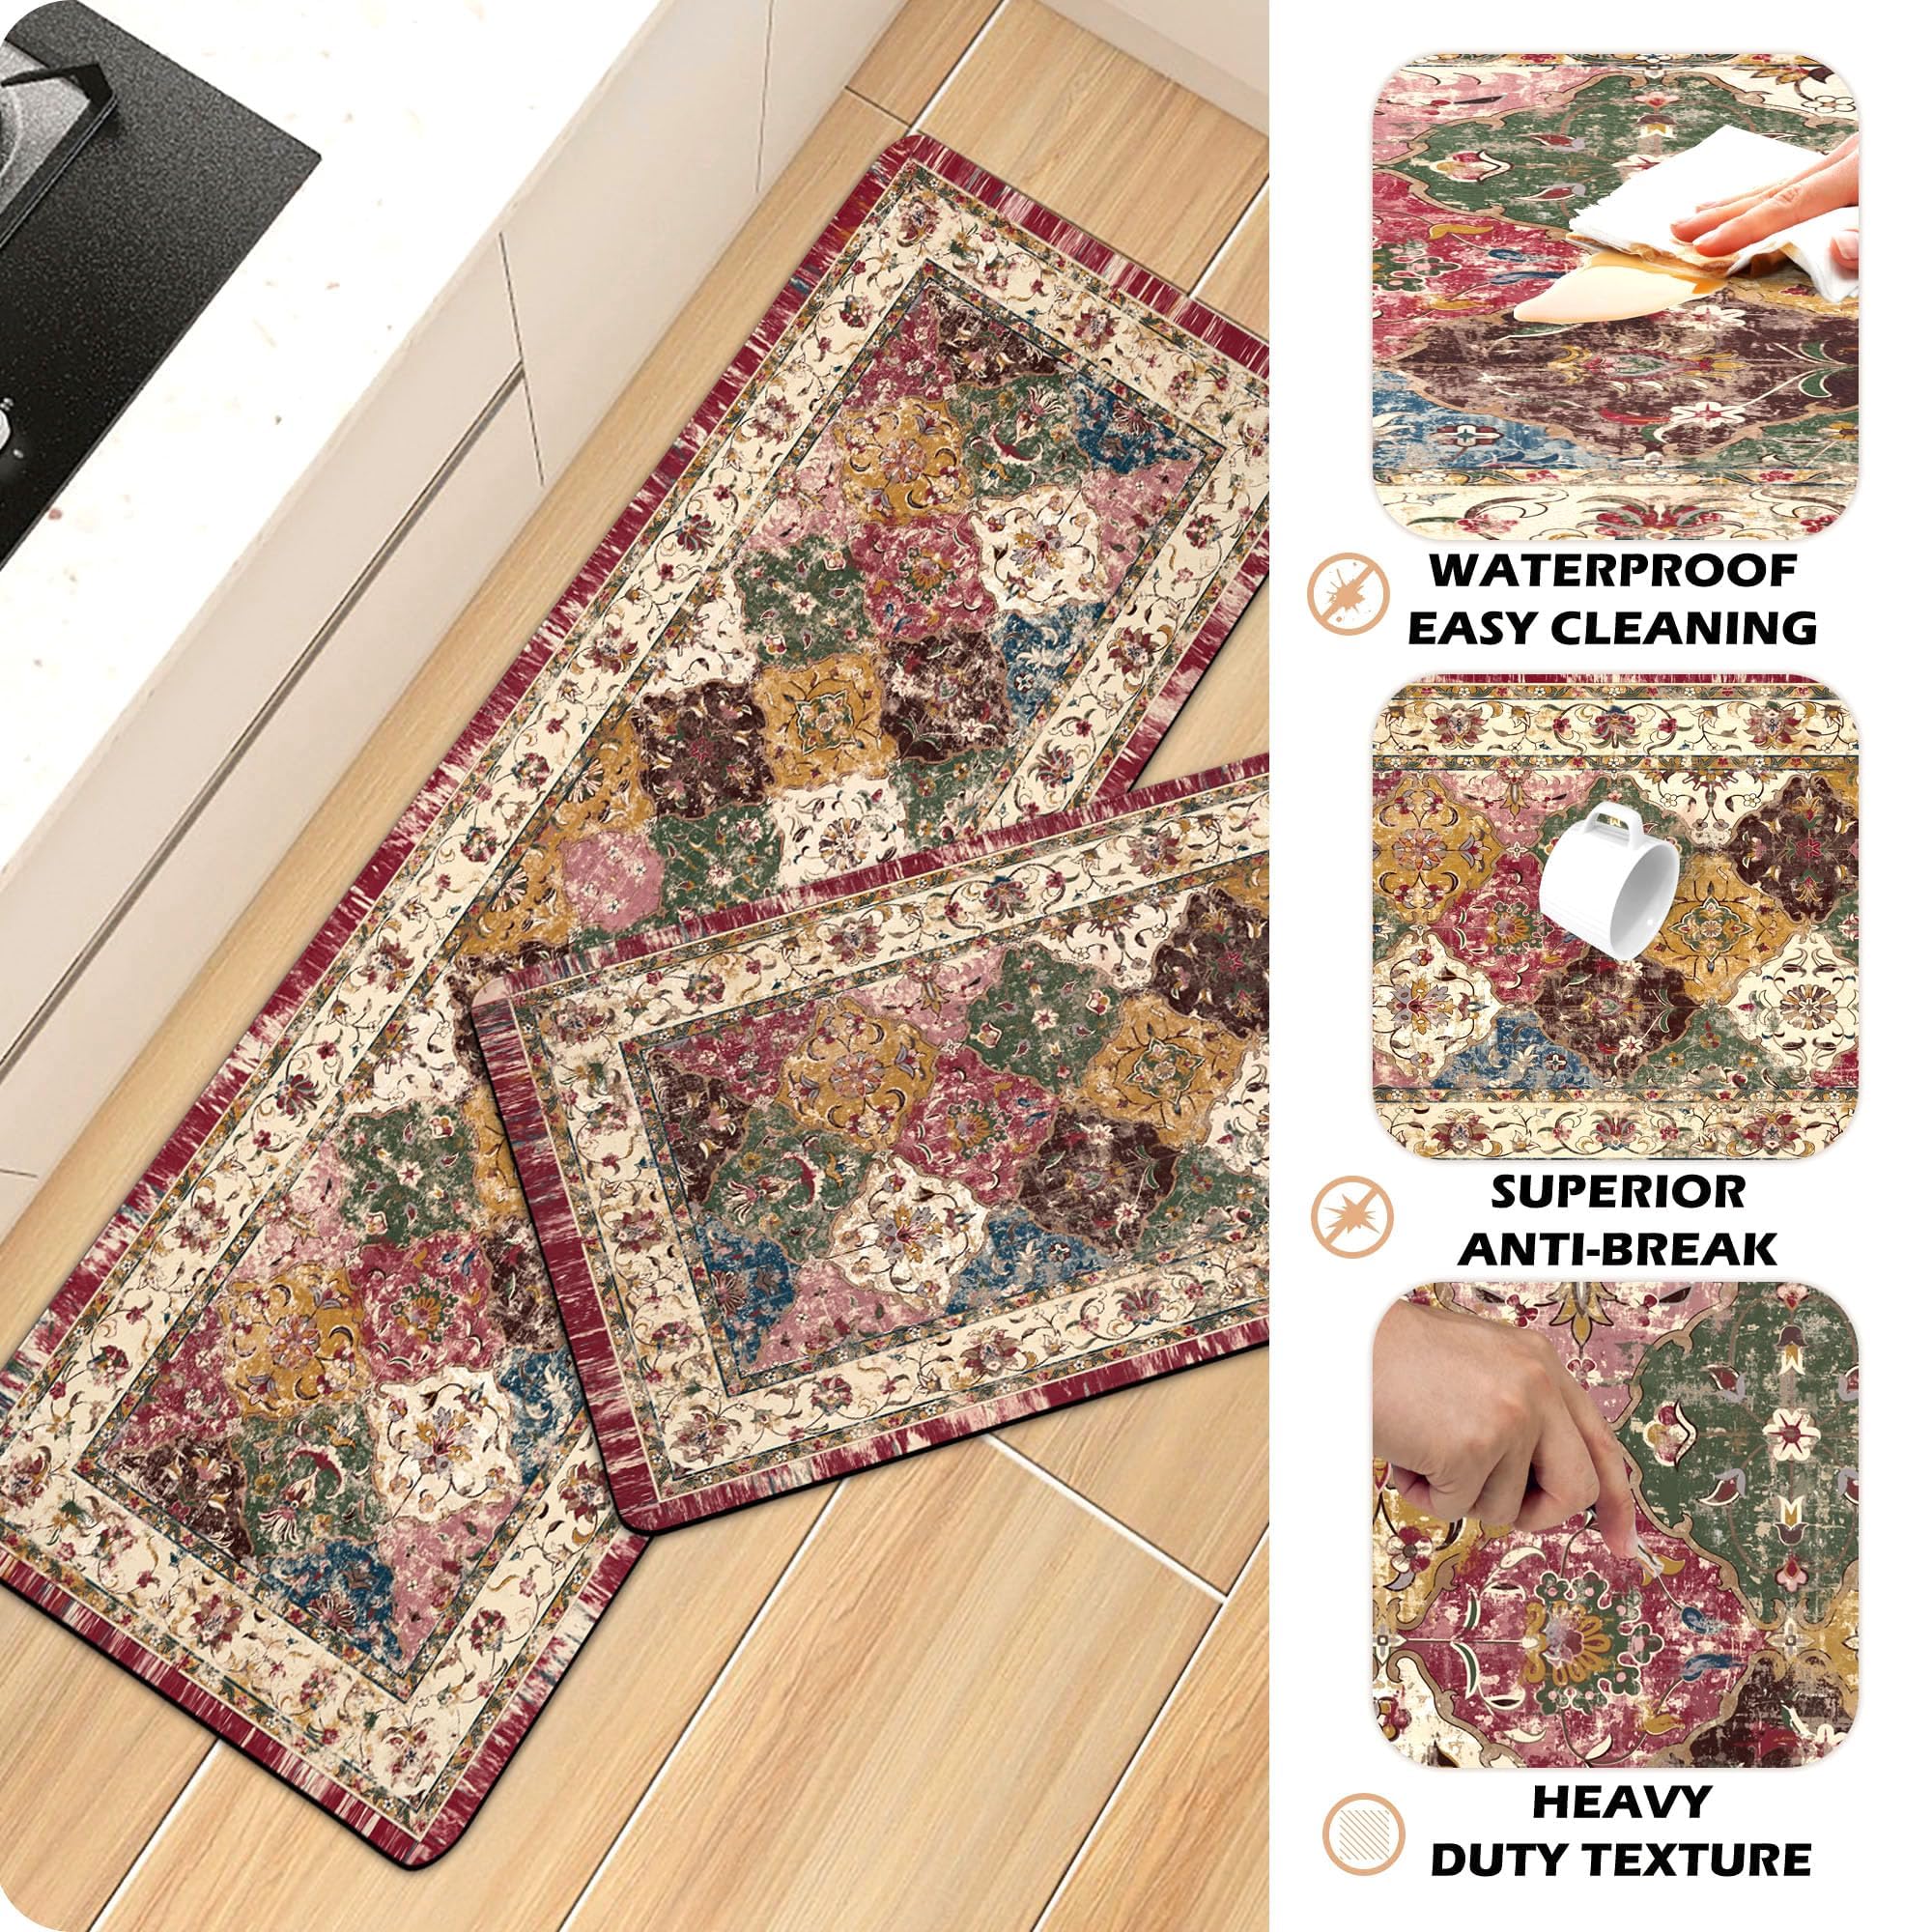 chiinvent Boho Style Kitchen Rugs and mats Set of 2,Retro Farmhouse Kitchen Mats for Sink,Cushioned Anti-Fatigue Comfort Kitchen Waterproof Non-Skid,Laundry Area Rugs Runner 17.3"x28"+17.3"x47"